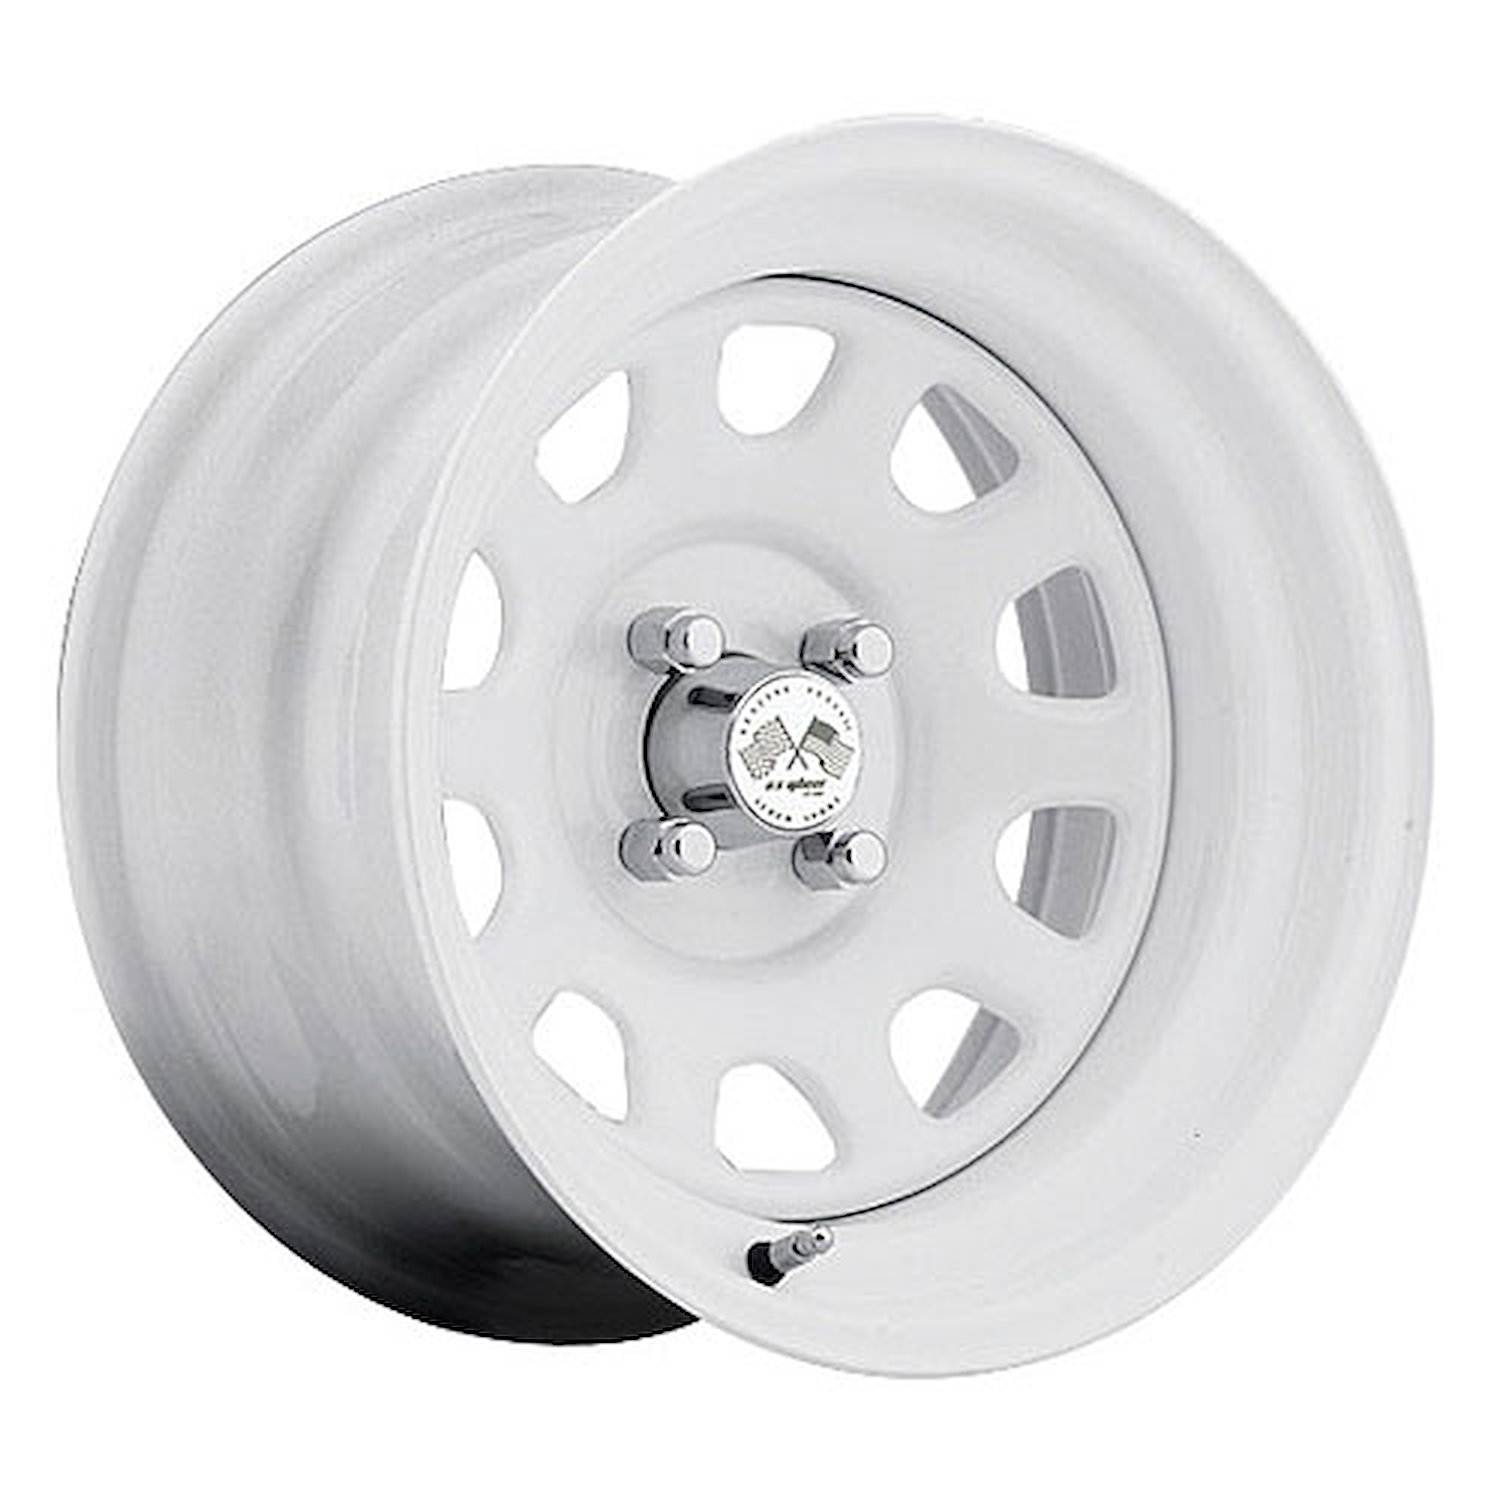 PAINTED DAYTONA FWD DRIFTER WHITE 16 x 8 4 x 45 Bolt Circle 45 Back Spacing 0 offset 266 Center Bore 1400 lbs Load Rating